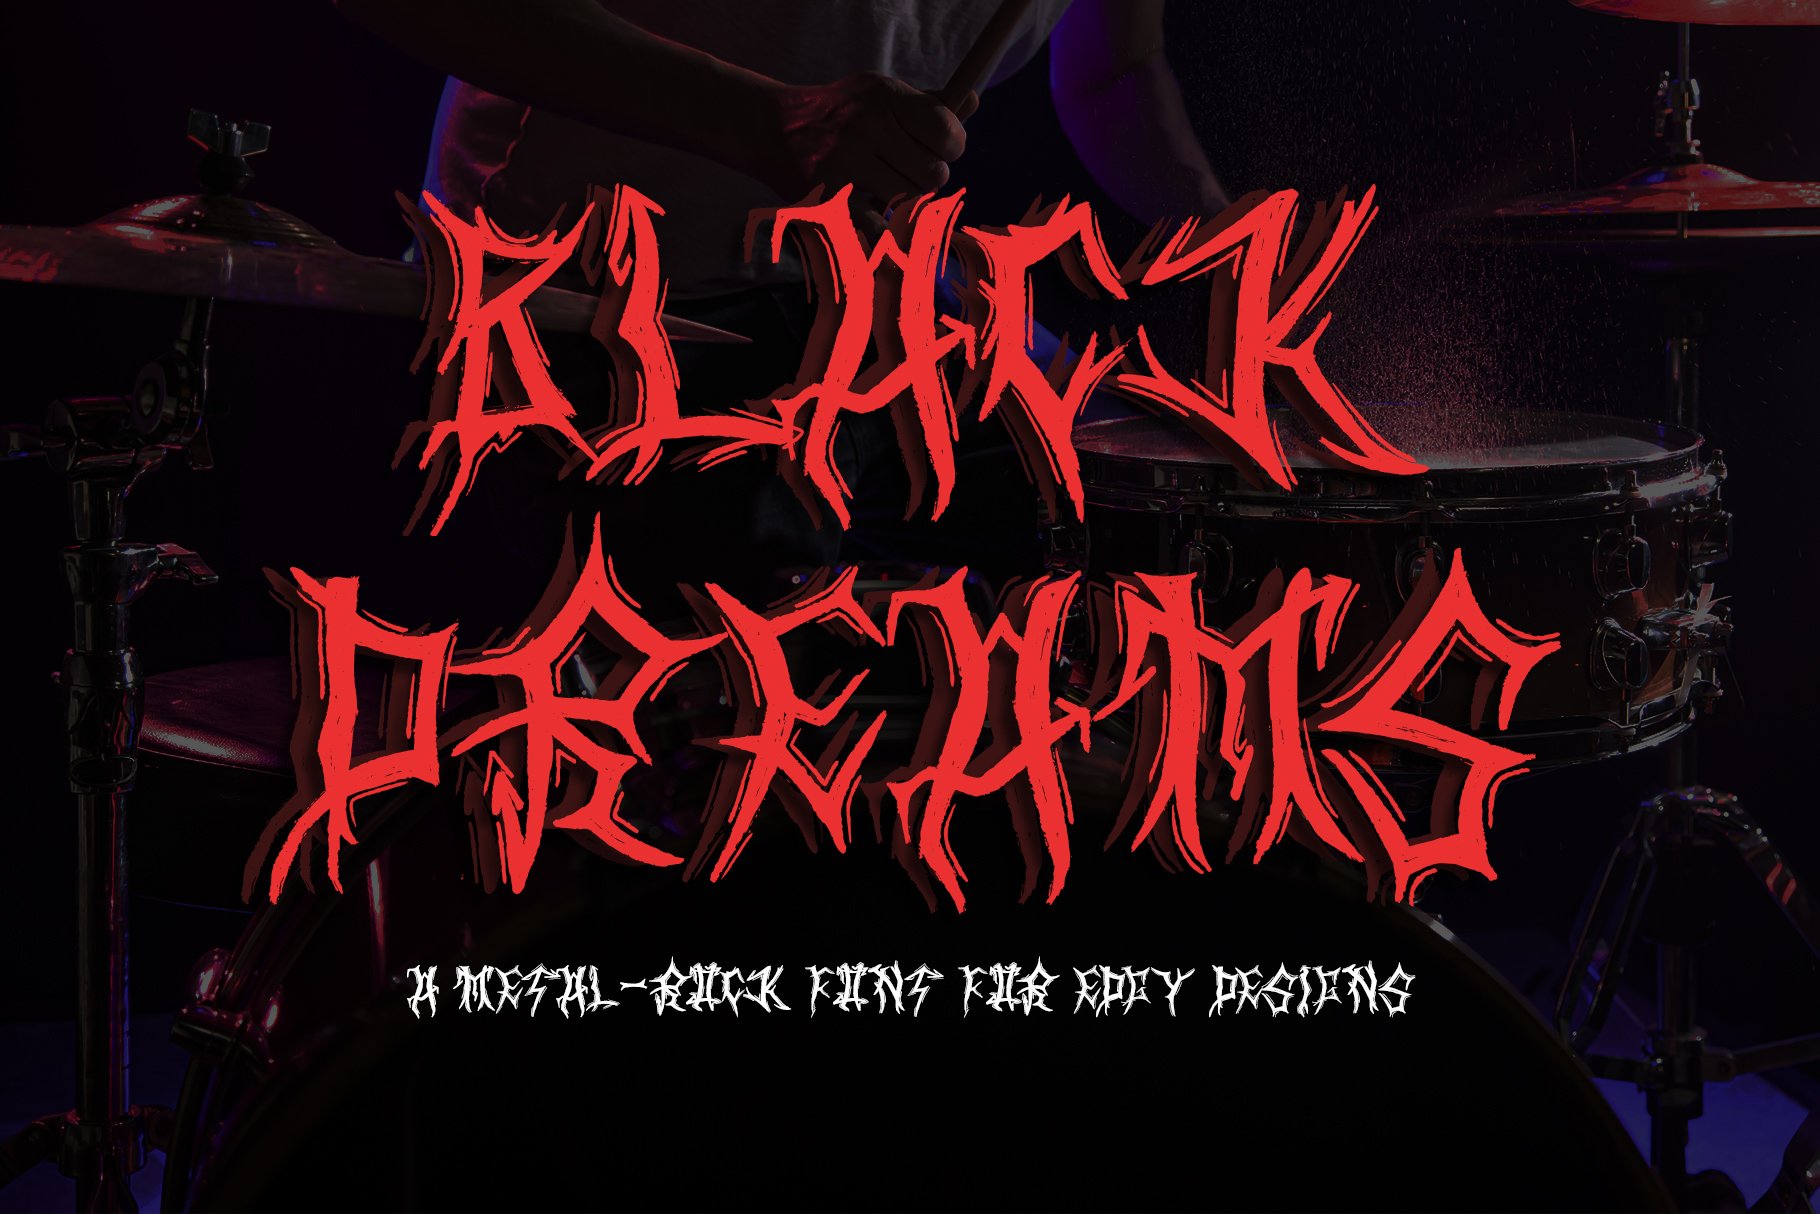 Black metal font "Black Dreams" with a raw and rugged texture.